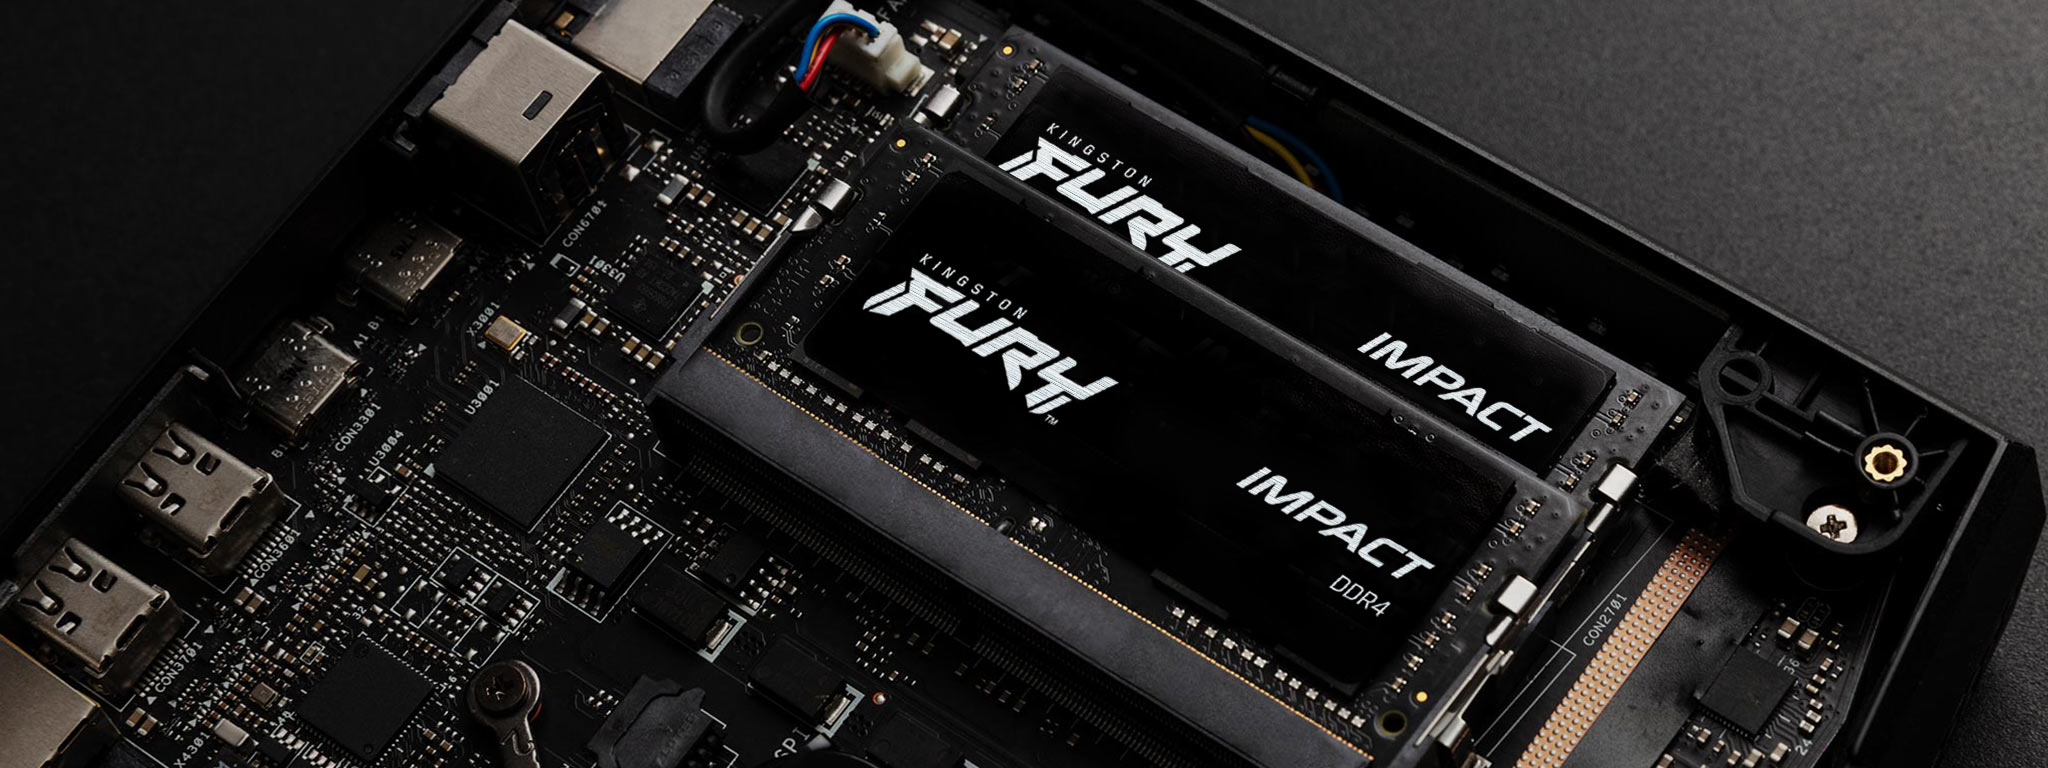 Two Kingston FURY Impact DDR4 SODIMM memory modules are mounted into their receptacles in a SFF PC's motherboard